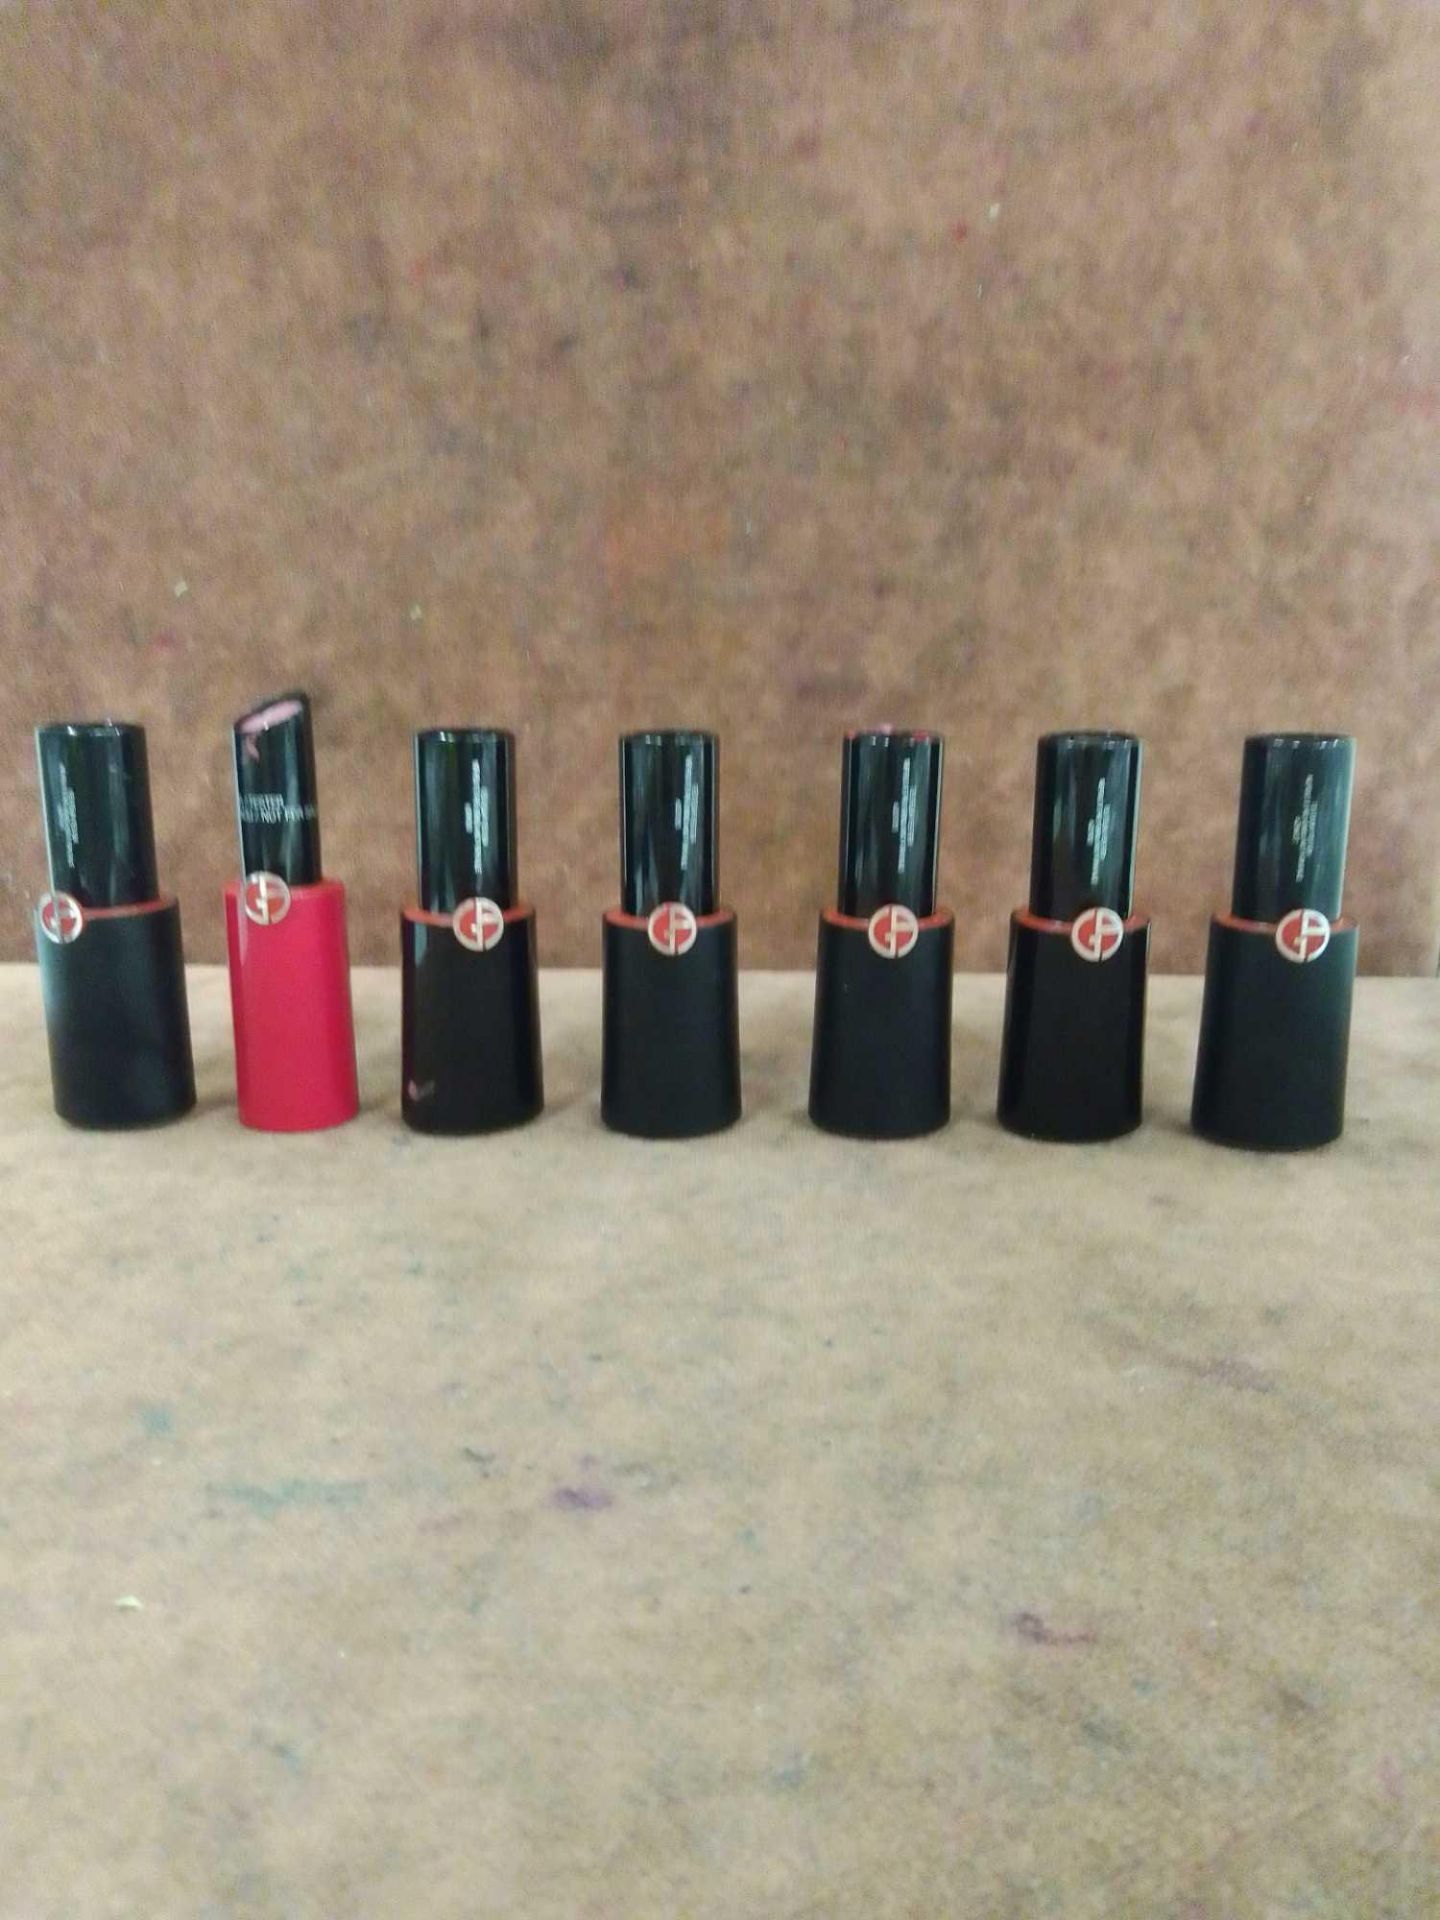 (Jb) RRP £210 Lot To Contain 7 Testers Of Giorgio Armani Lipsticks In Assorted Shades All Ex-Display